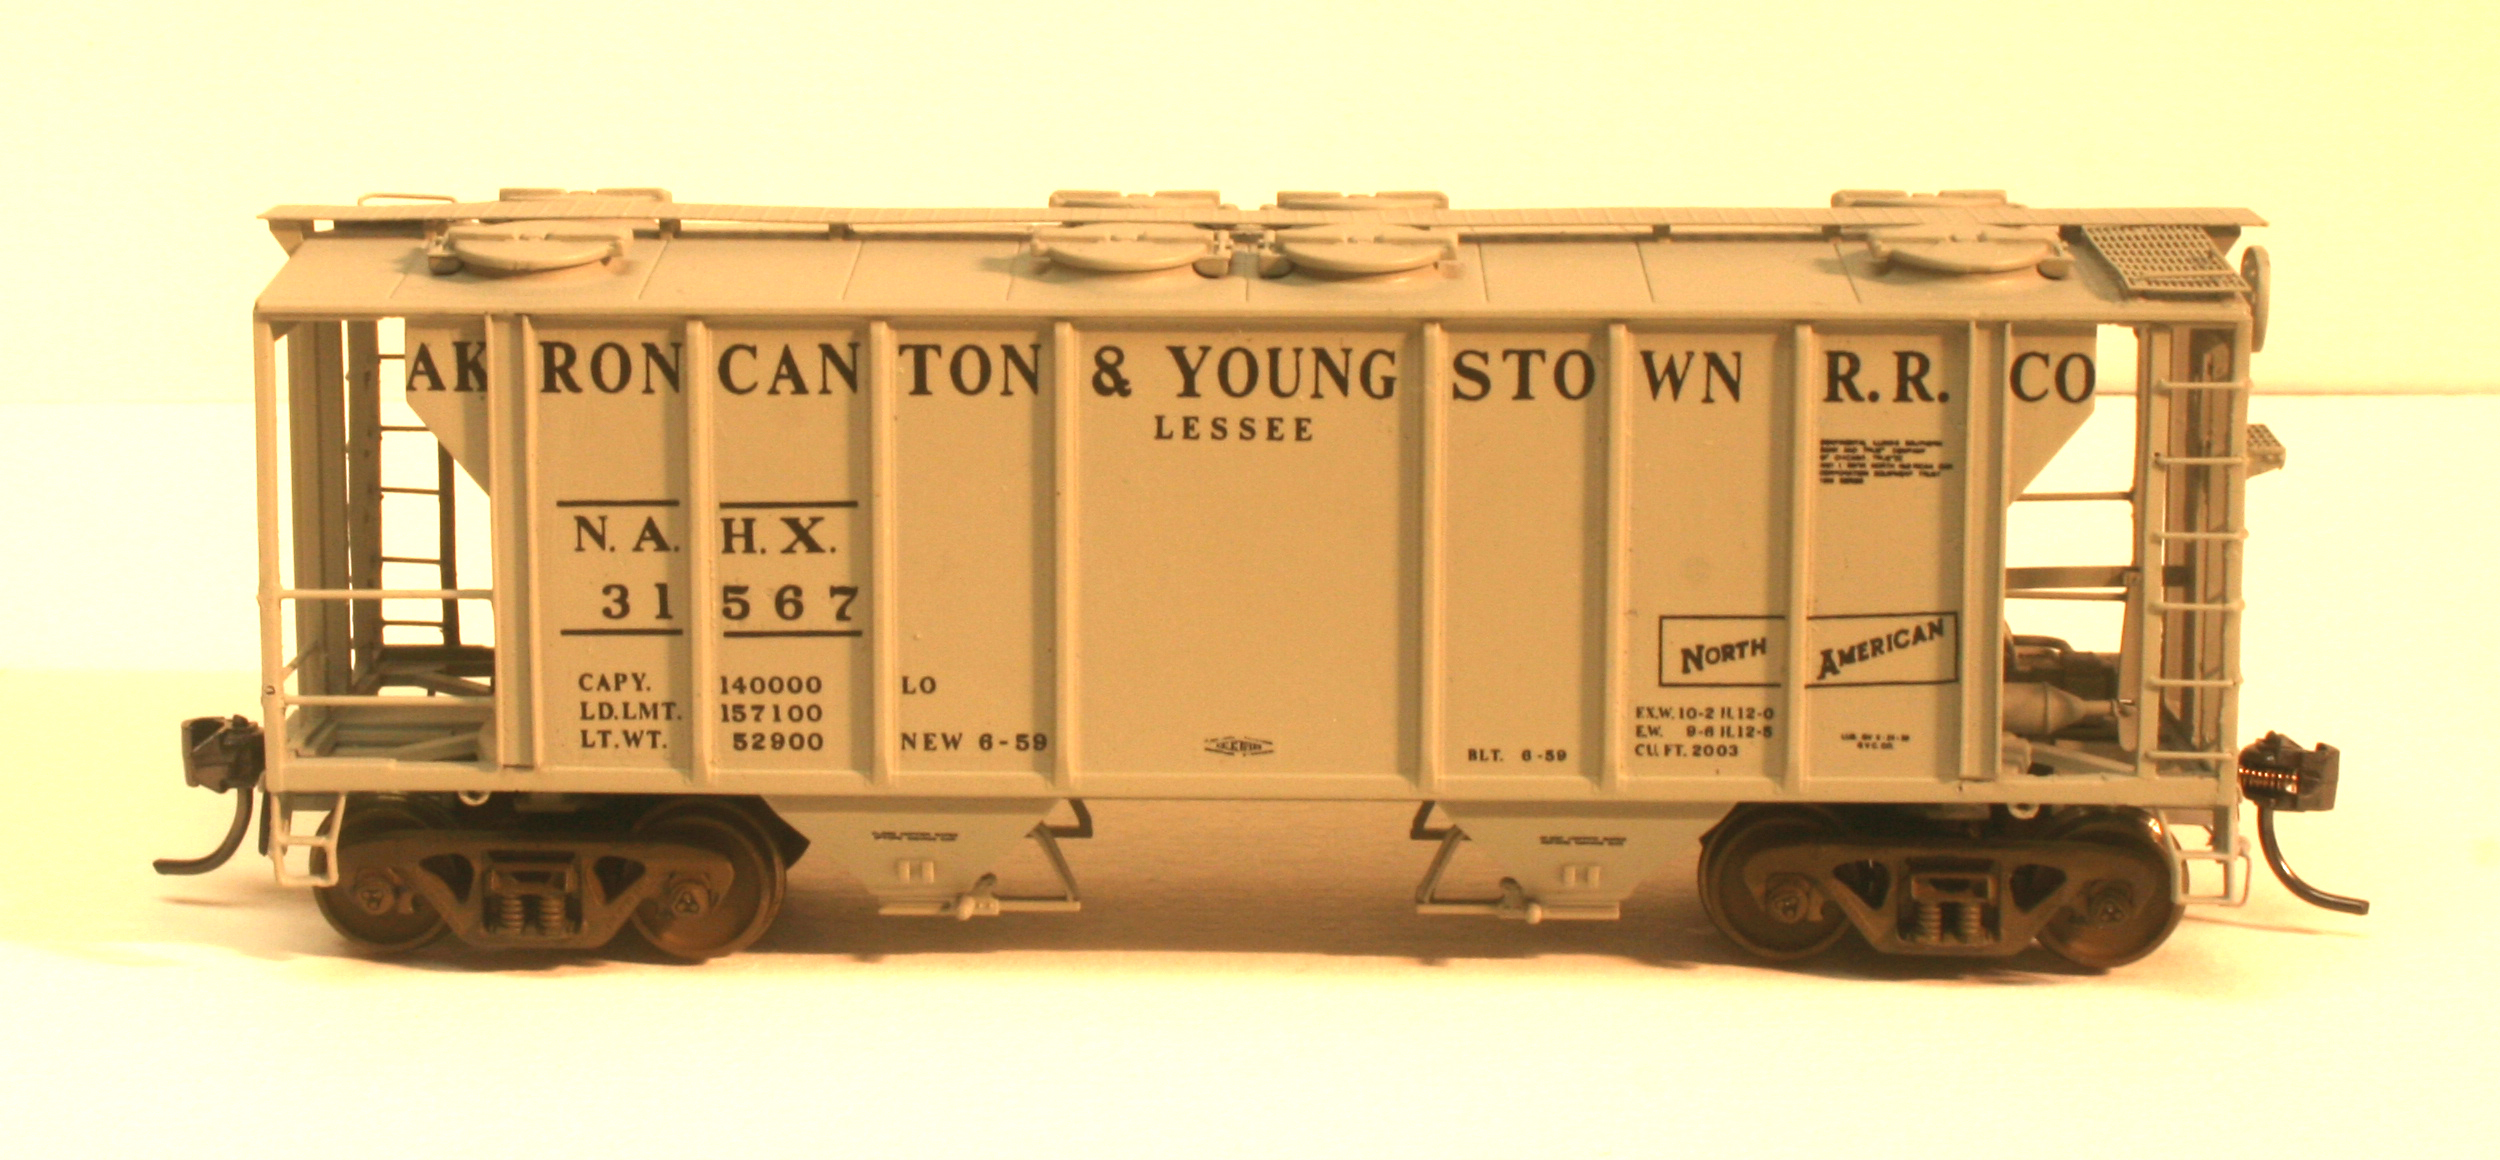 K4 S Decals Baltimore and Ohio 70 Ton Covered Hopper Black